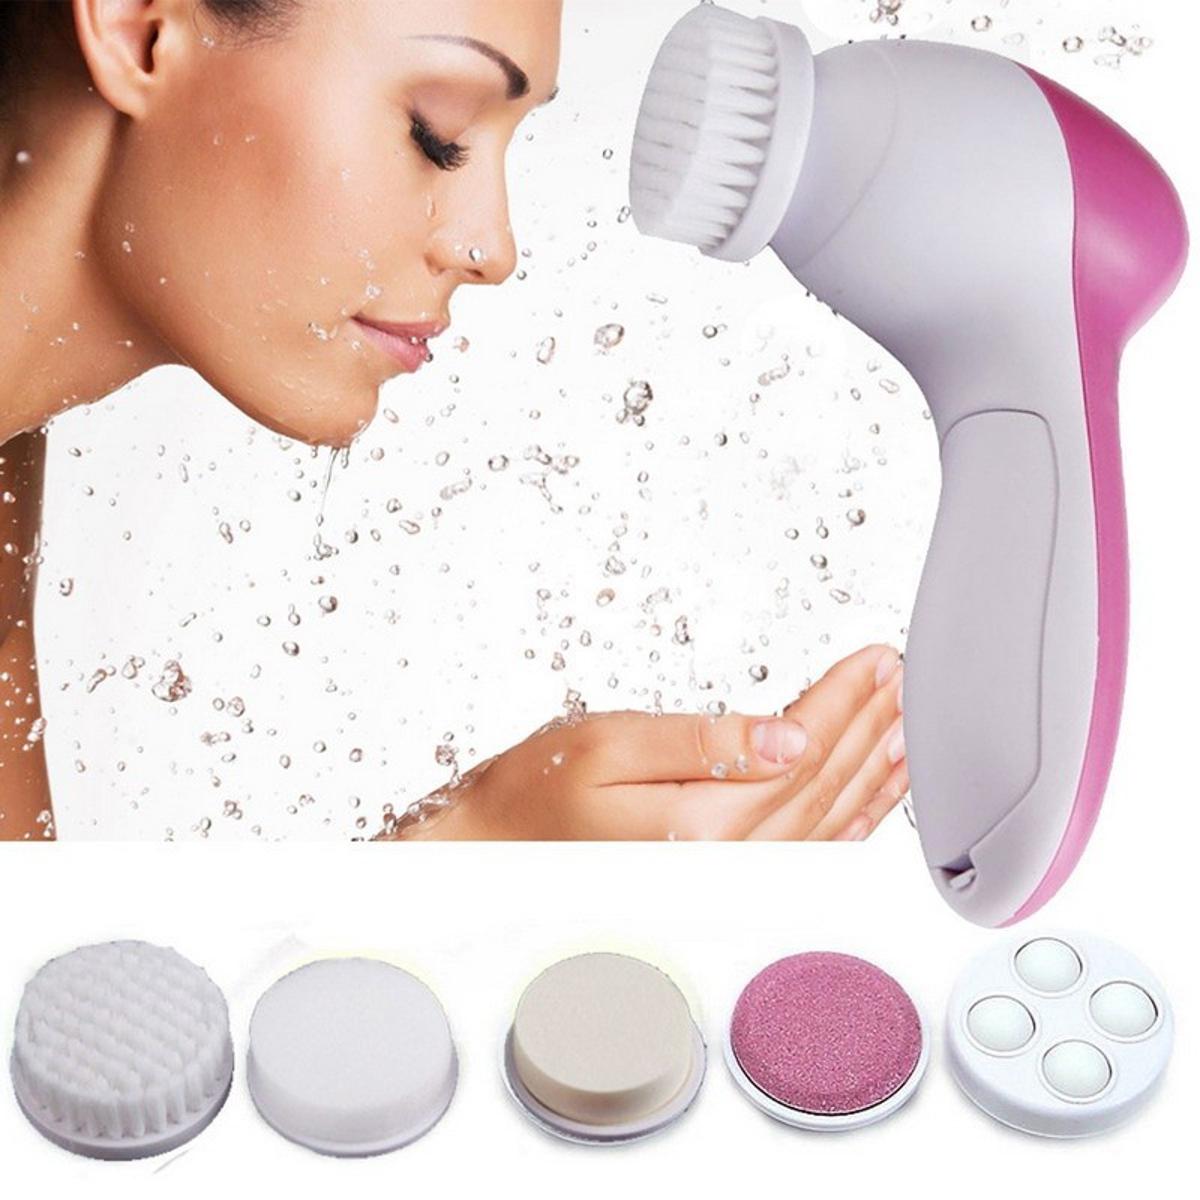 5 in 1 Facial Electric Cleanser & Massager